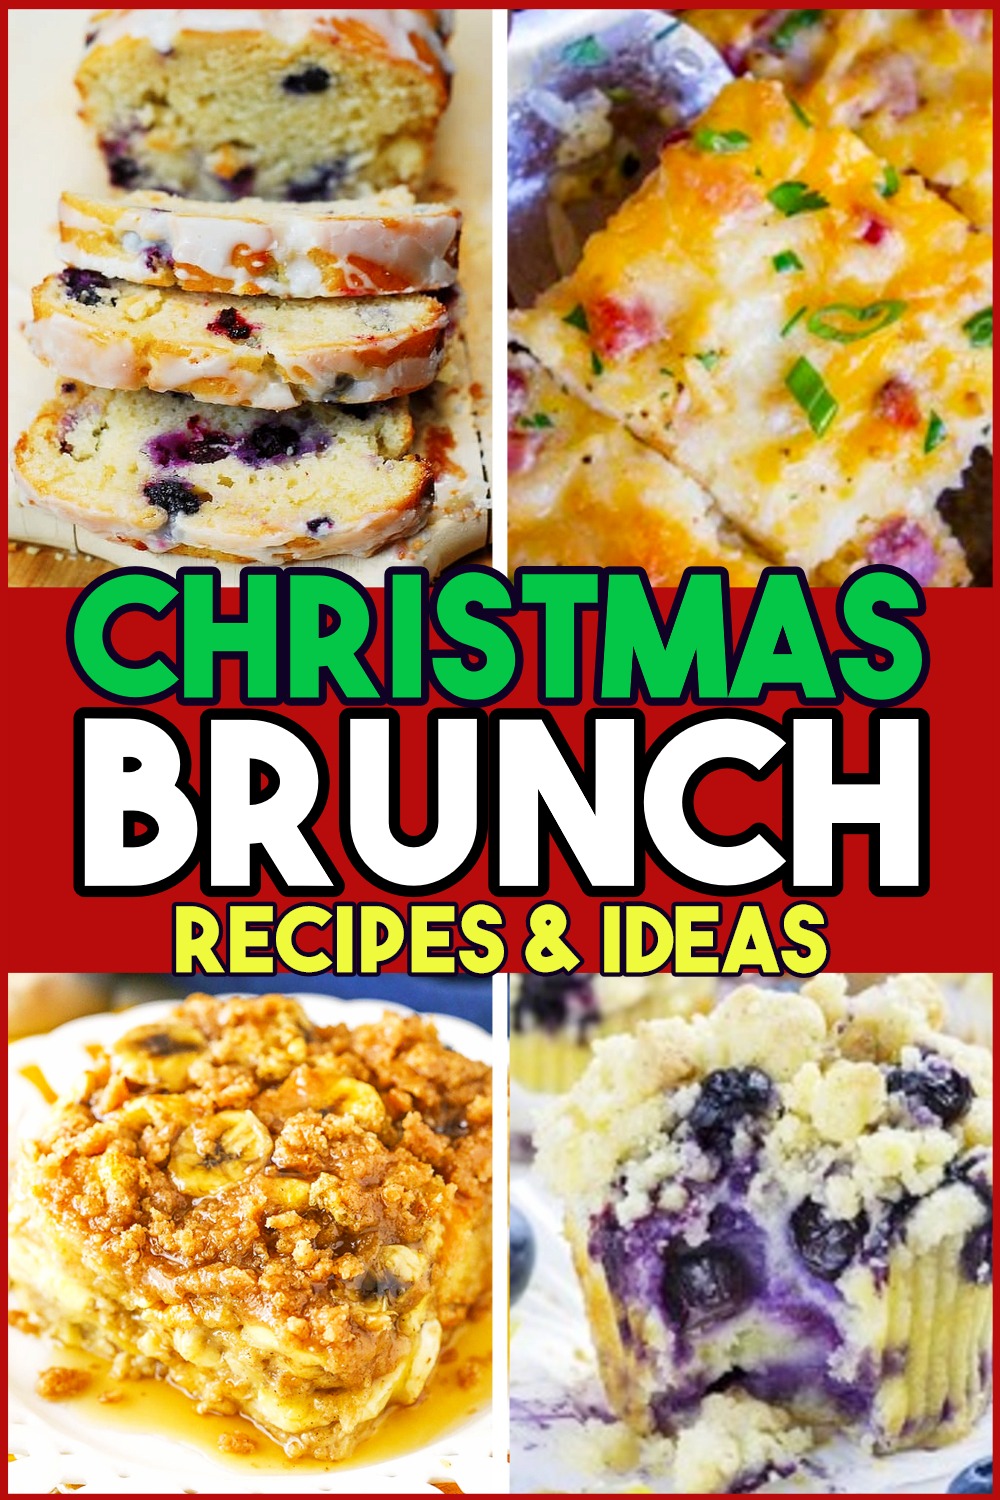 Christmas Brunch Ideas! Make Ahead Breakfast Casseroles and More Easy Recipes for a Budget Christmas Brunch Party - yummy and easy overnight breakfast casserole recipes (can even freeze in the freezer) - breakfast casserole make ahead easy recipes, brunch muffins & more easy breakfast ideas for Christmas morning, holiday brunch party or potluck to enjoy sweet breakfast recipes like desserts for non breakfast eaters and weekend guests